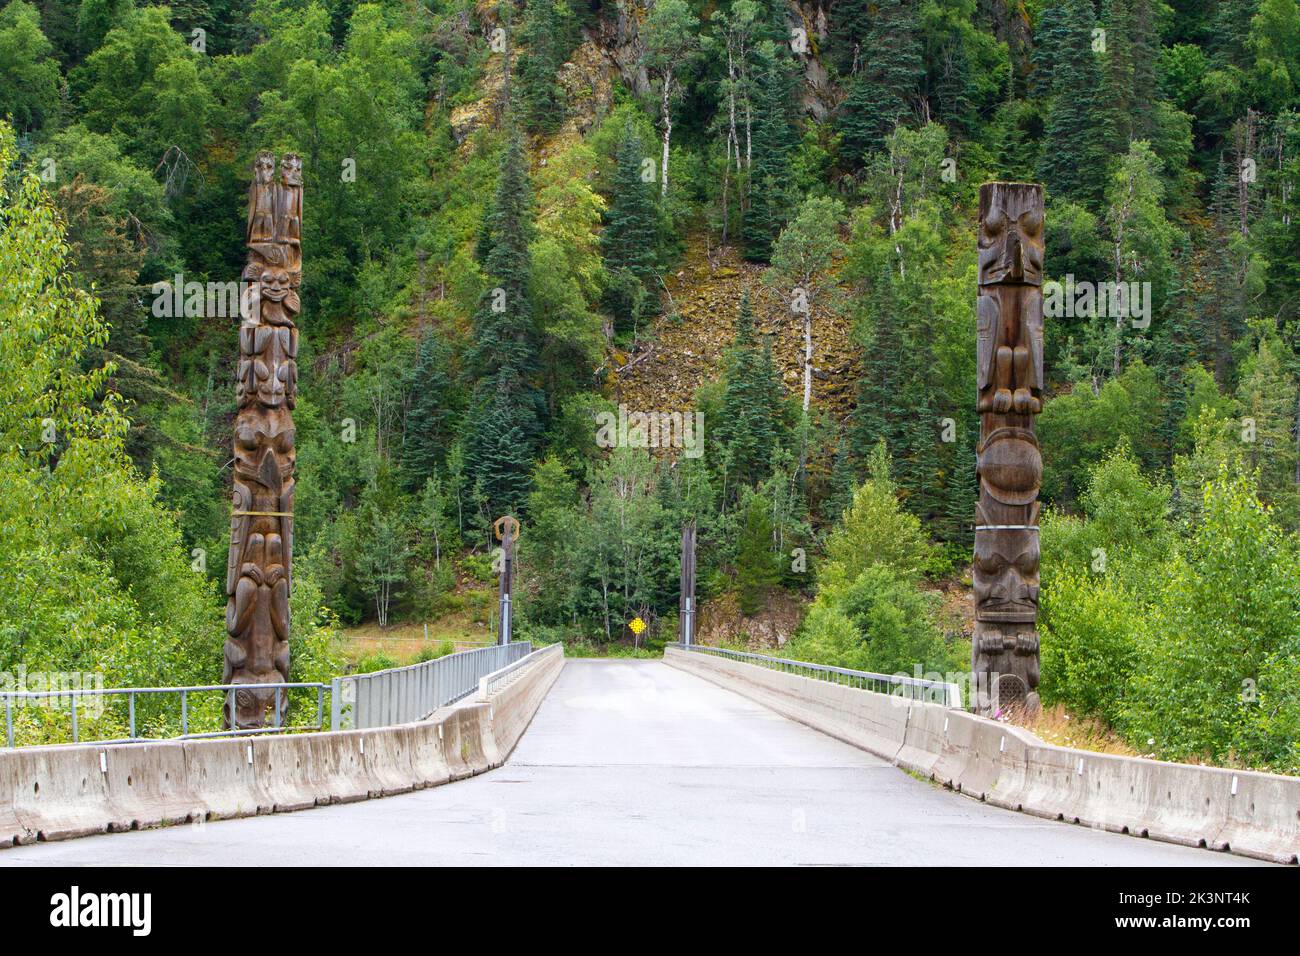 A bridge over the Nass River on the outskirts of the Nisga'a village of Gitwinksihlkw, British Columbia, Canada, showing totem poles on either side. Stock Photo